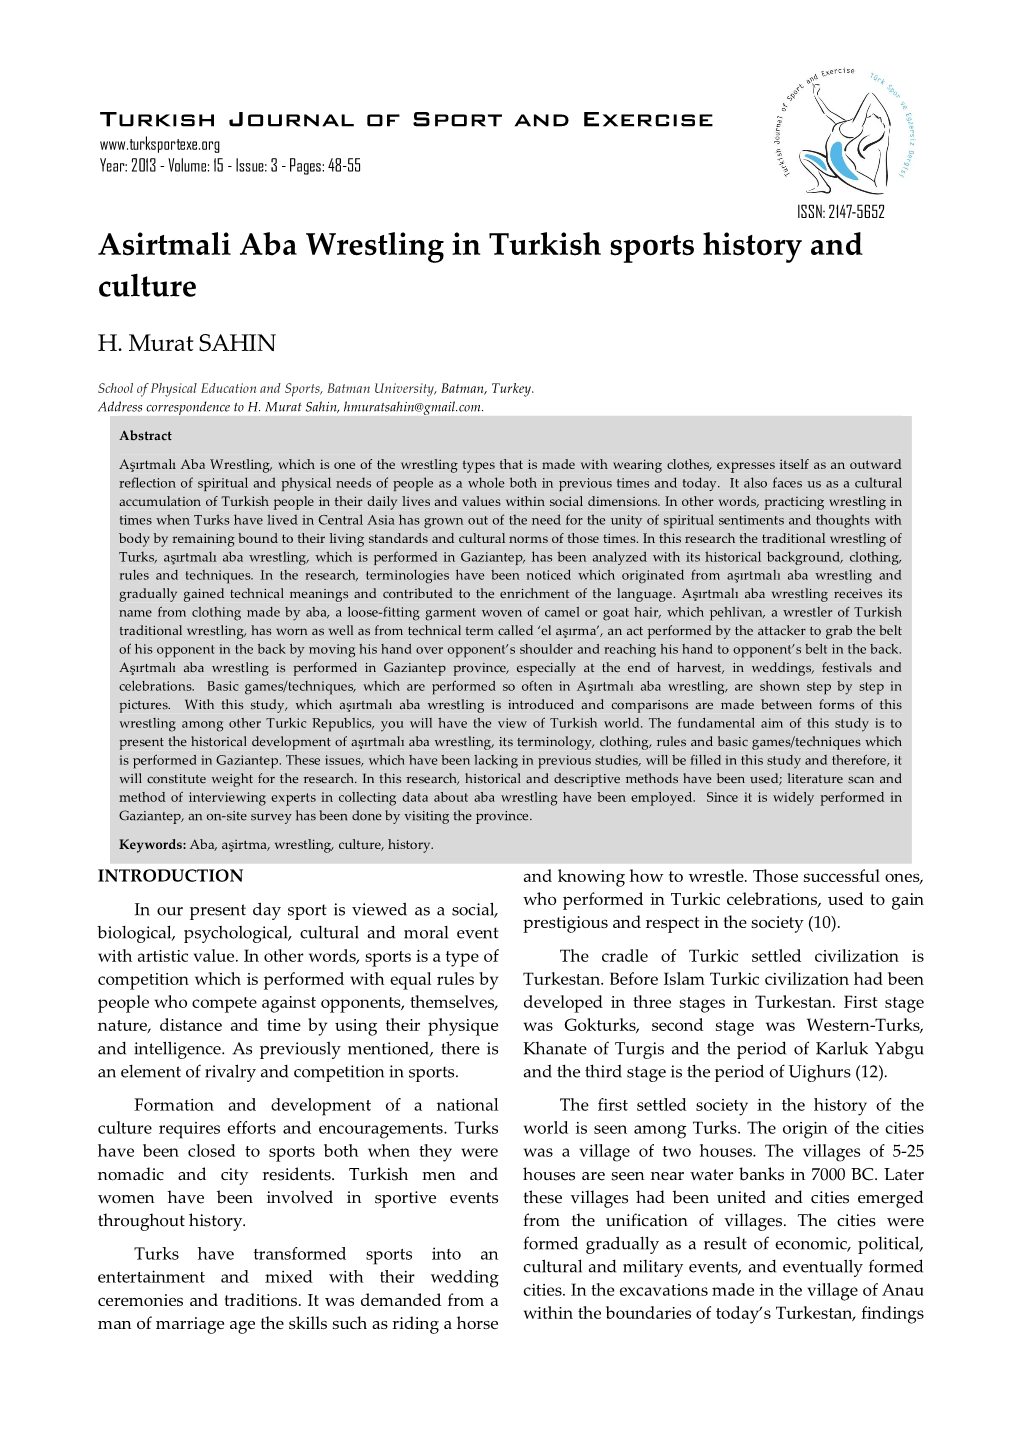 Asirtmali Aba Wrestling in Turkish Sports History and Culture